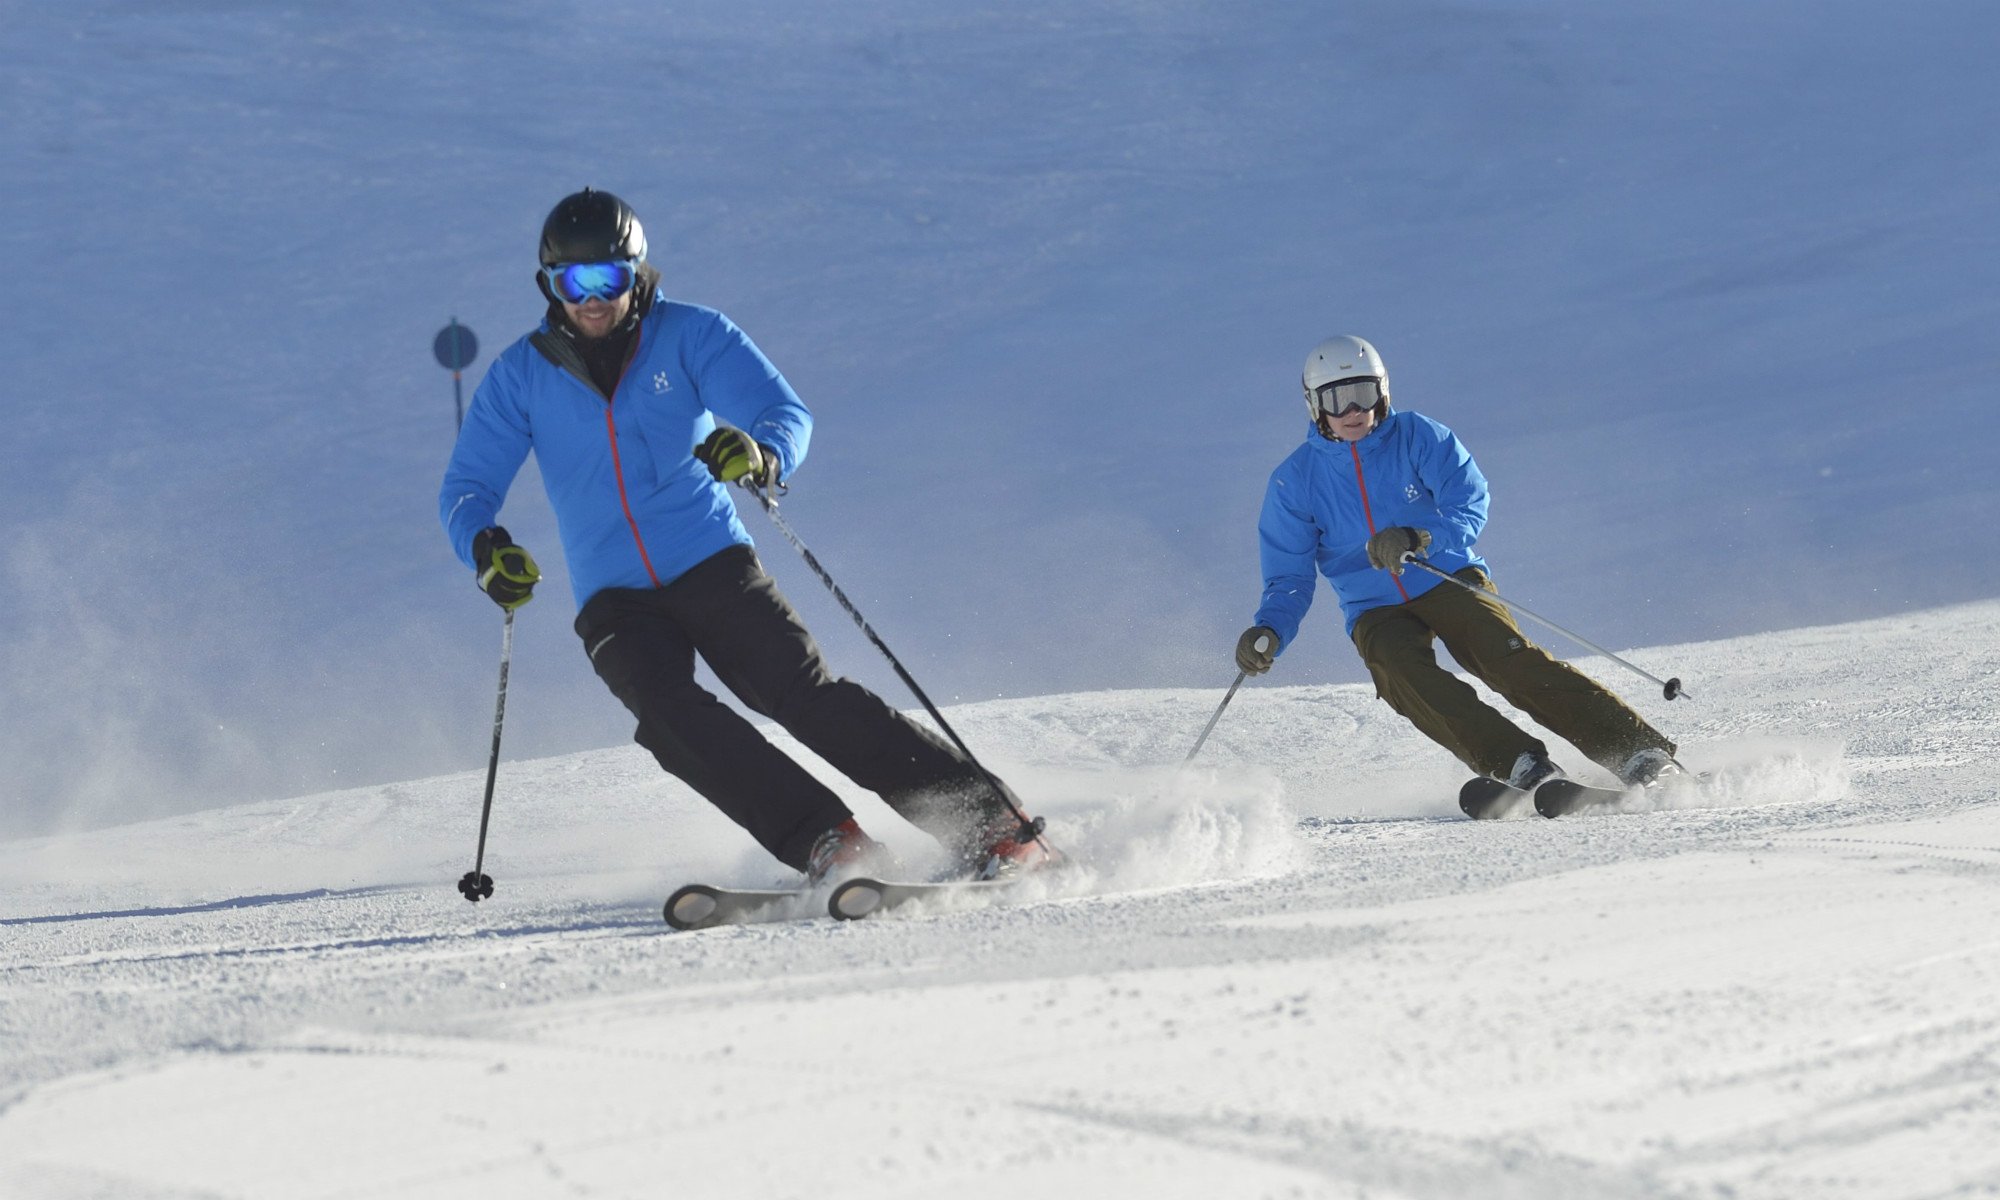 Two skiers skiing down the piste doing parallel turns.